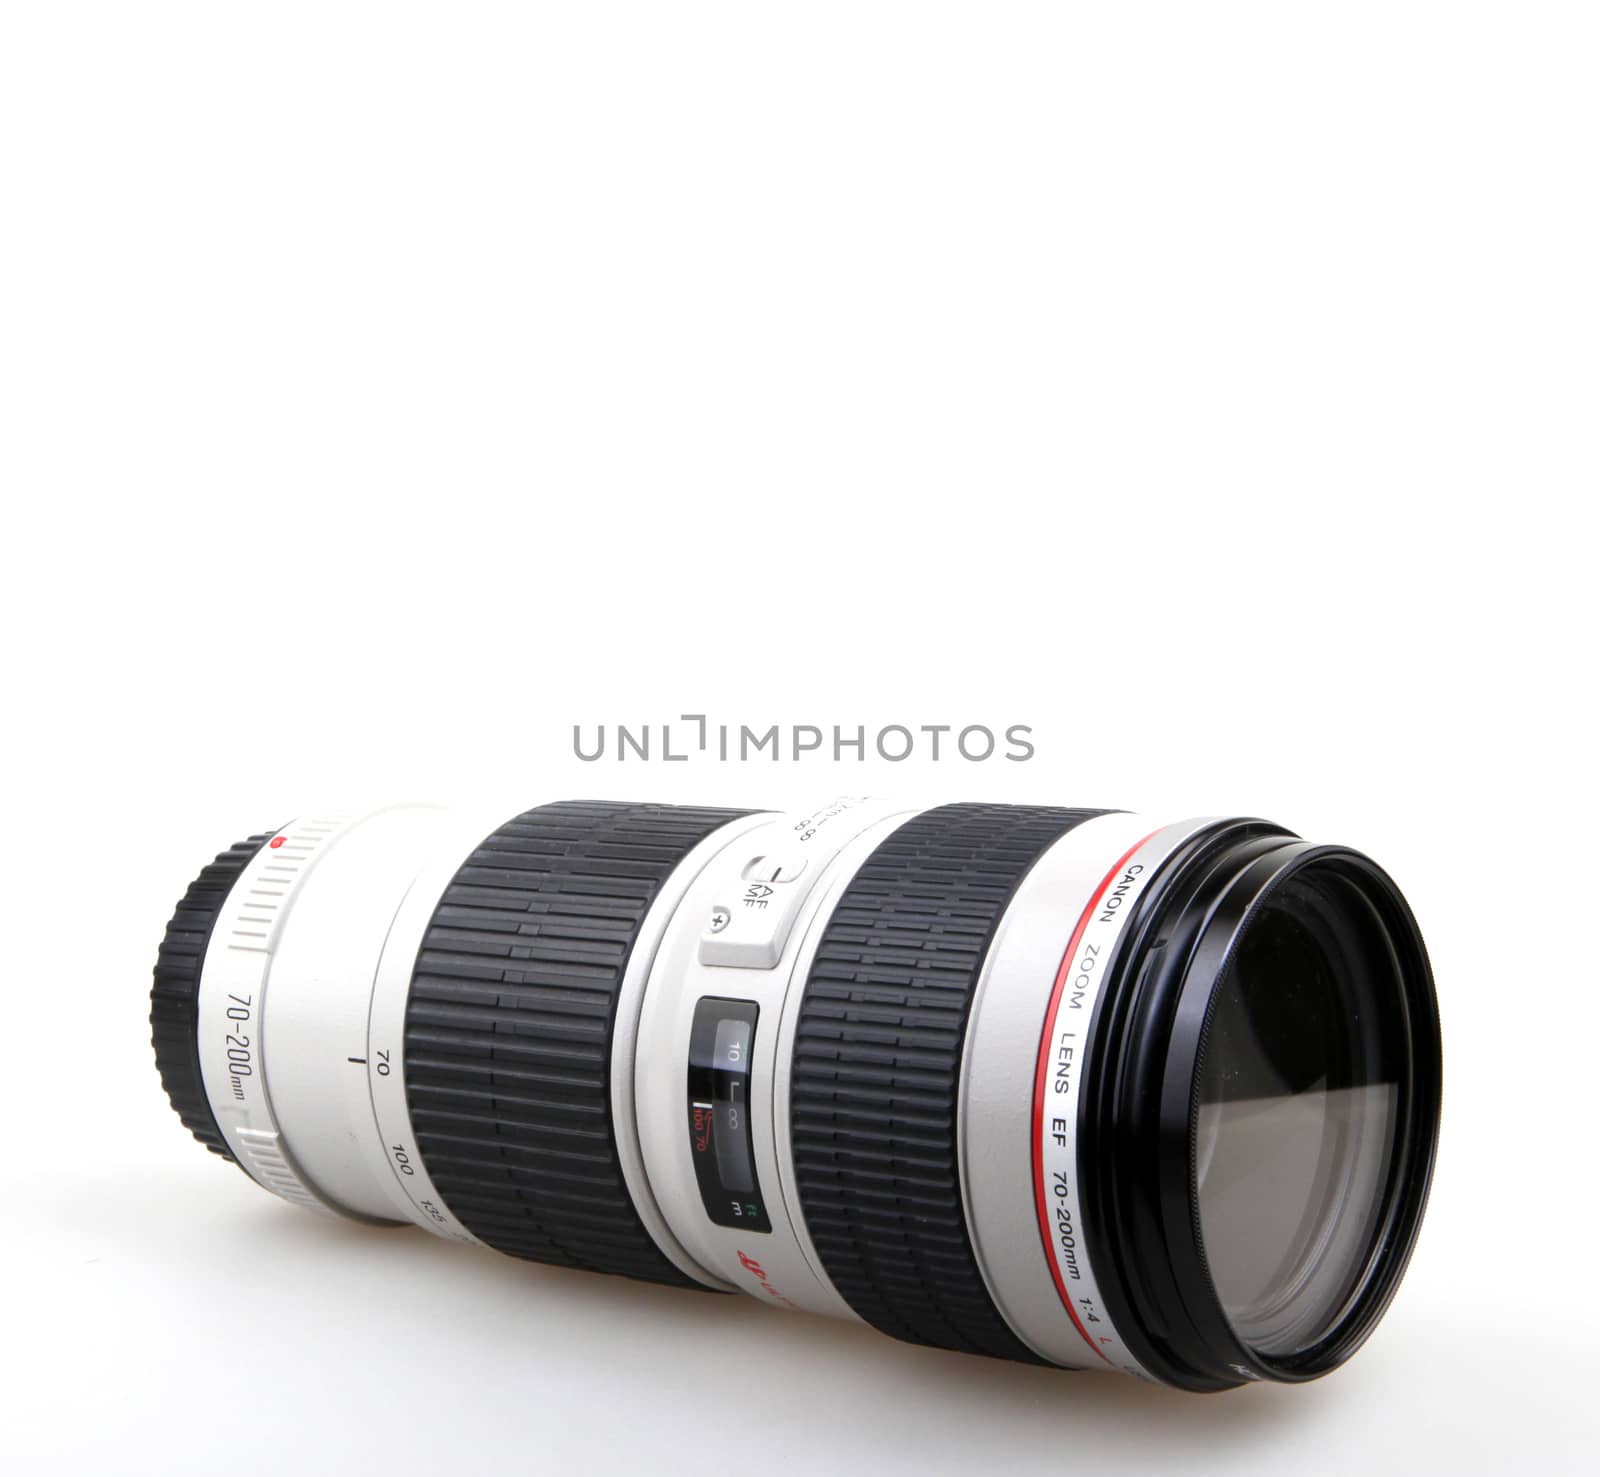 AYTOS, BULGARIA - DECEMBER 11, 2015: Canon EF 70-200mm f/4L USM Lens. Canon Inc. is a Japanese multinational corporation specialized in the manufacture of imaging and optical products.